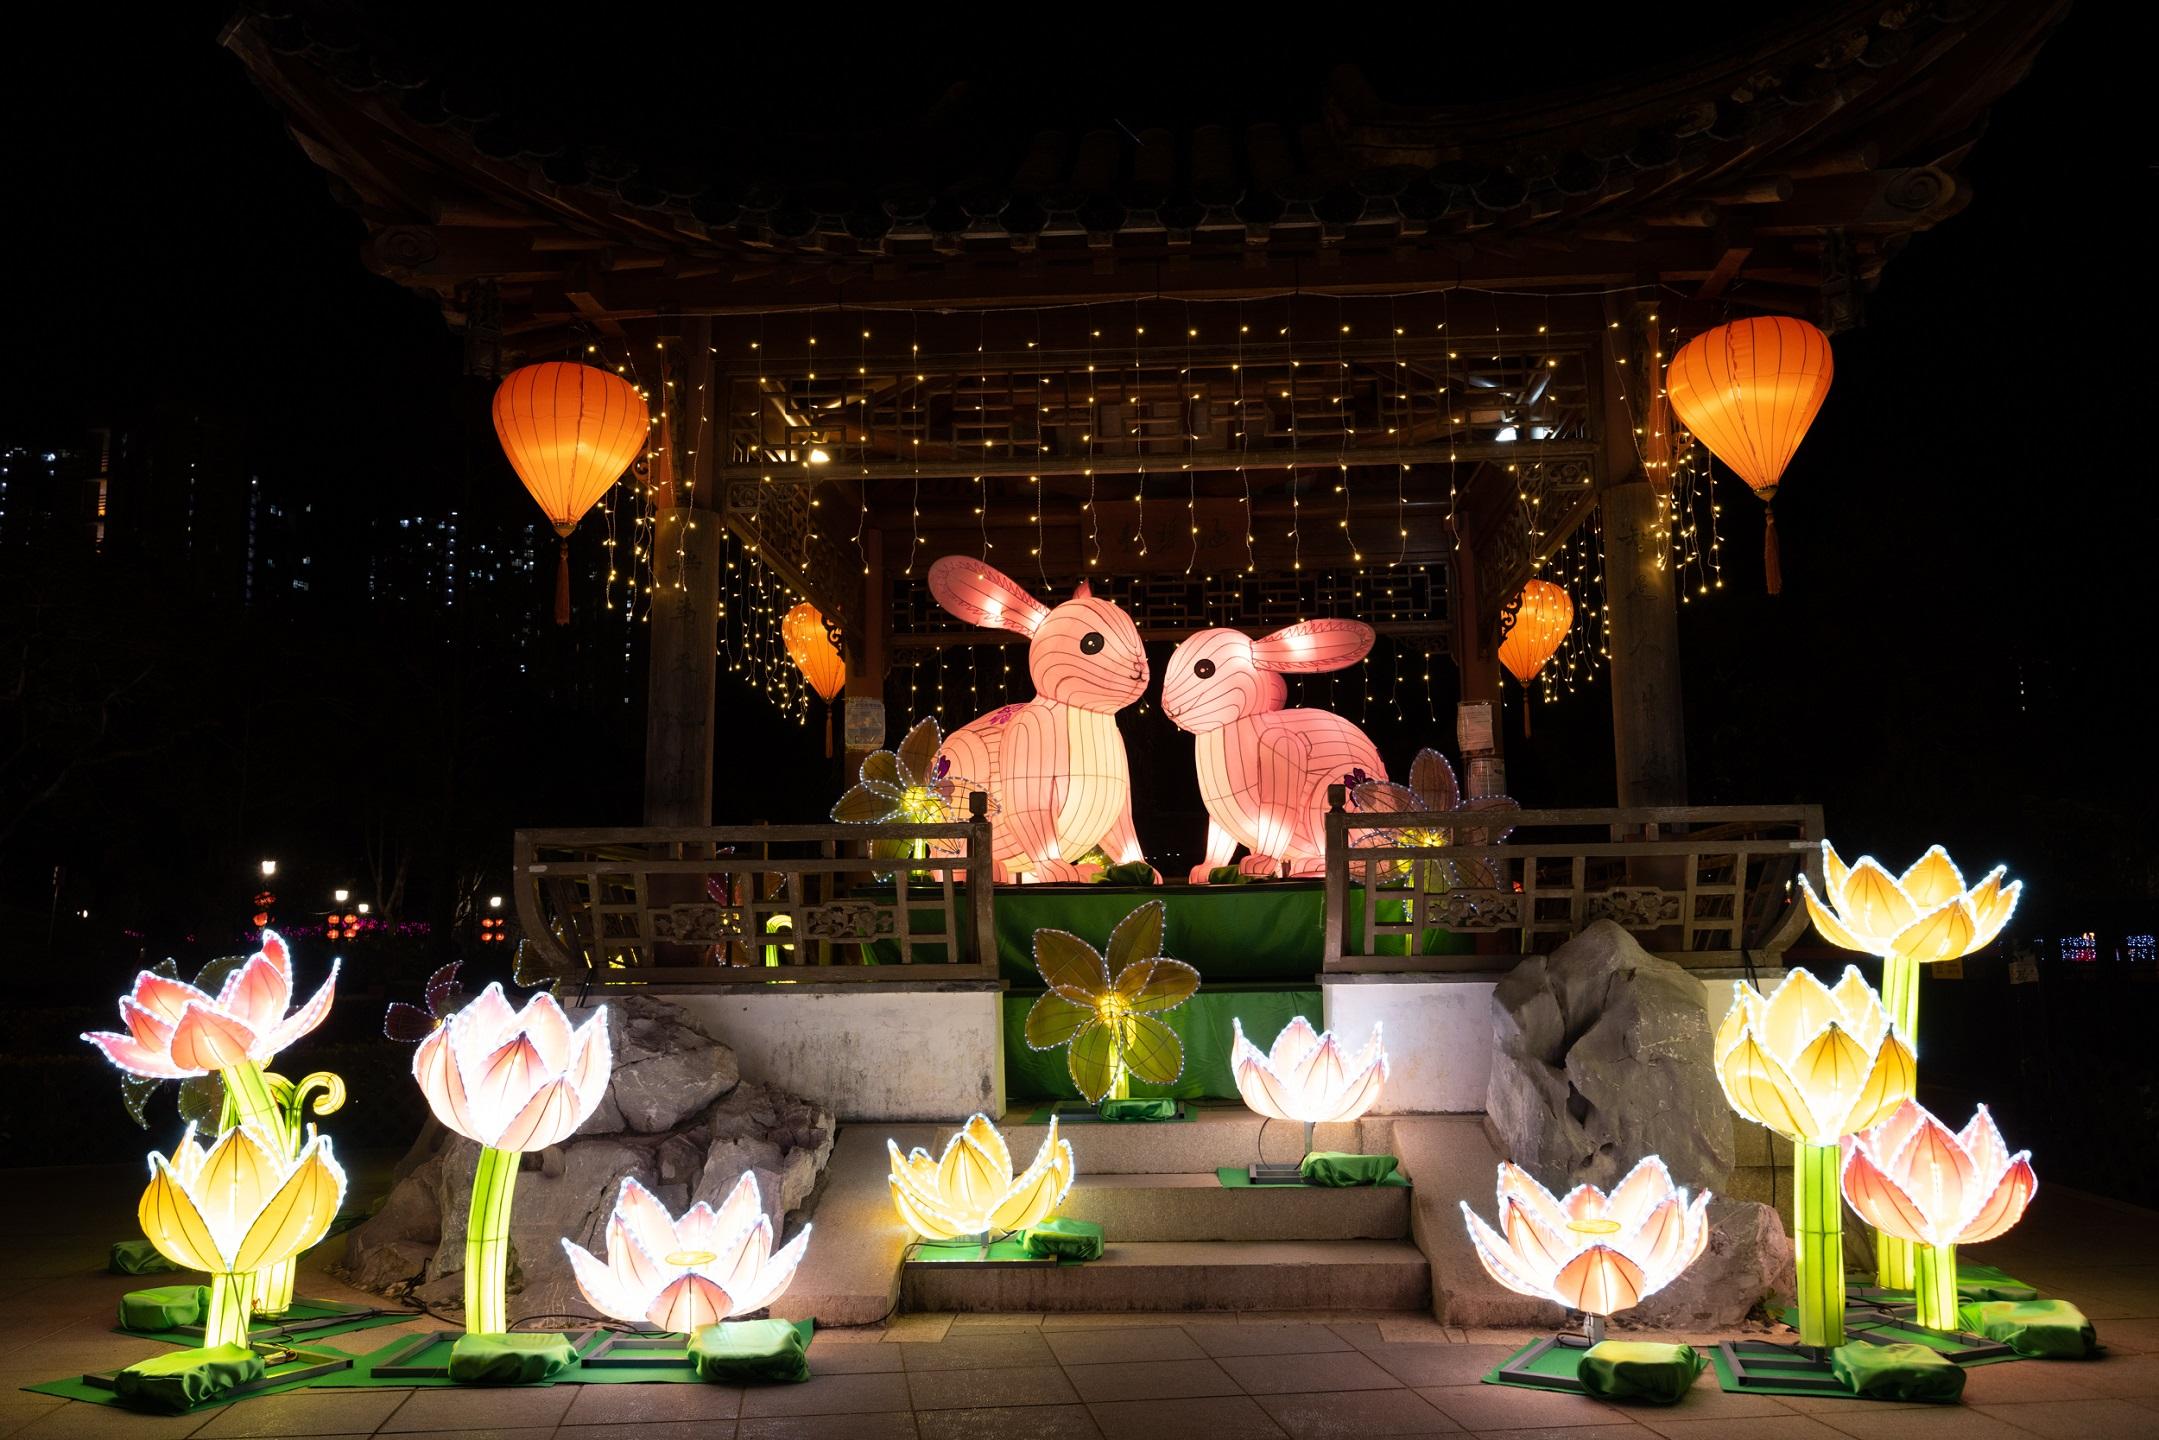 The Leisure and Cultural Services Department (LCSD) will present the Lunar New Year Lantern Displays at both North District Park and Tsuen Wan Park from today (January 31). The displays will last until February 7 and admission is free. Photo shows the New Territories East Lunar New Year Lantern Displays at North District Park. Under the theme of "Spring is in the air", the displays will feature lanterns in the shapes of flowers, animals and insects in dazzling colours, which bear the message of rebirth. The displays also include lanterns of LCSD mascots Enggie Pup and Artti Kitty in traditional Chinese attire.